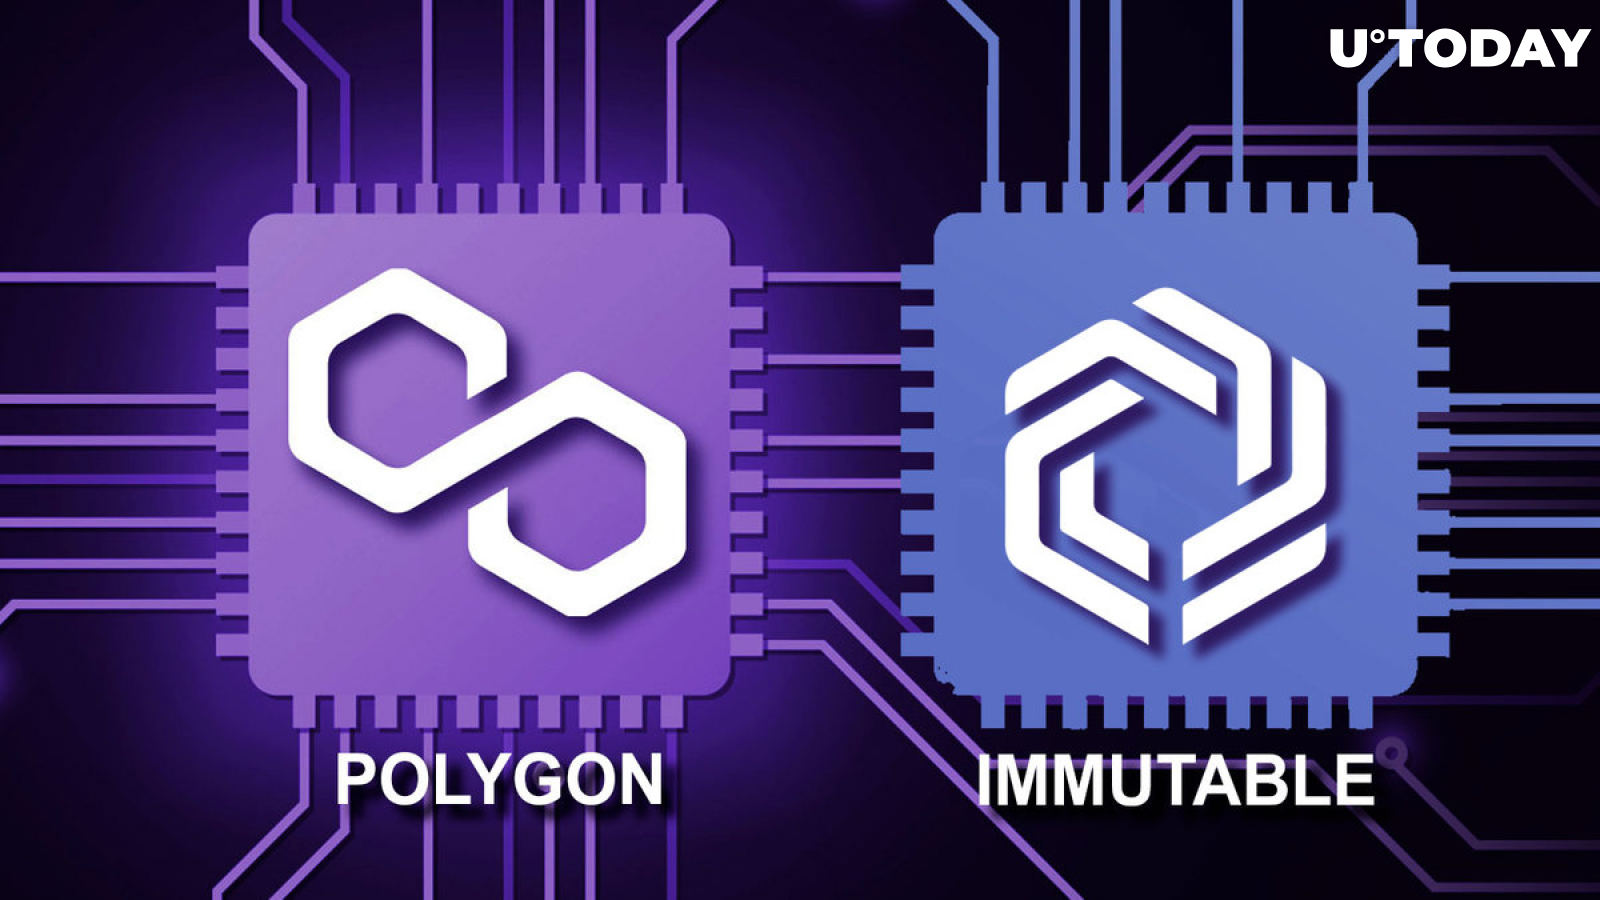 Immutable (IMX) Sees Its Turnover Rocketing by 10x With This Polygon (MATIC) Partnership